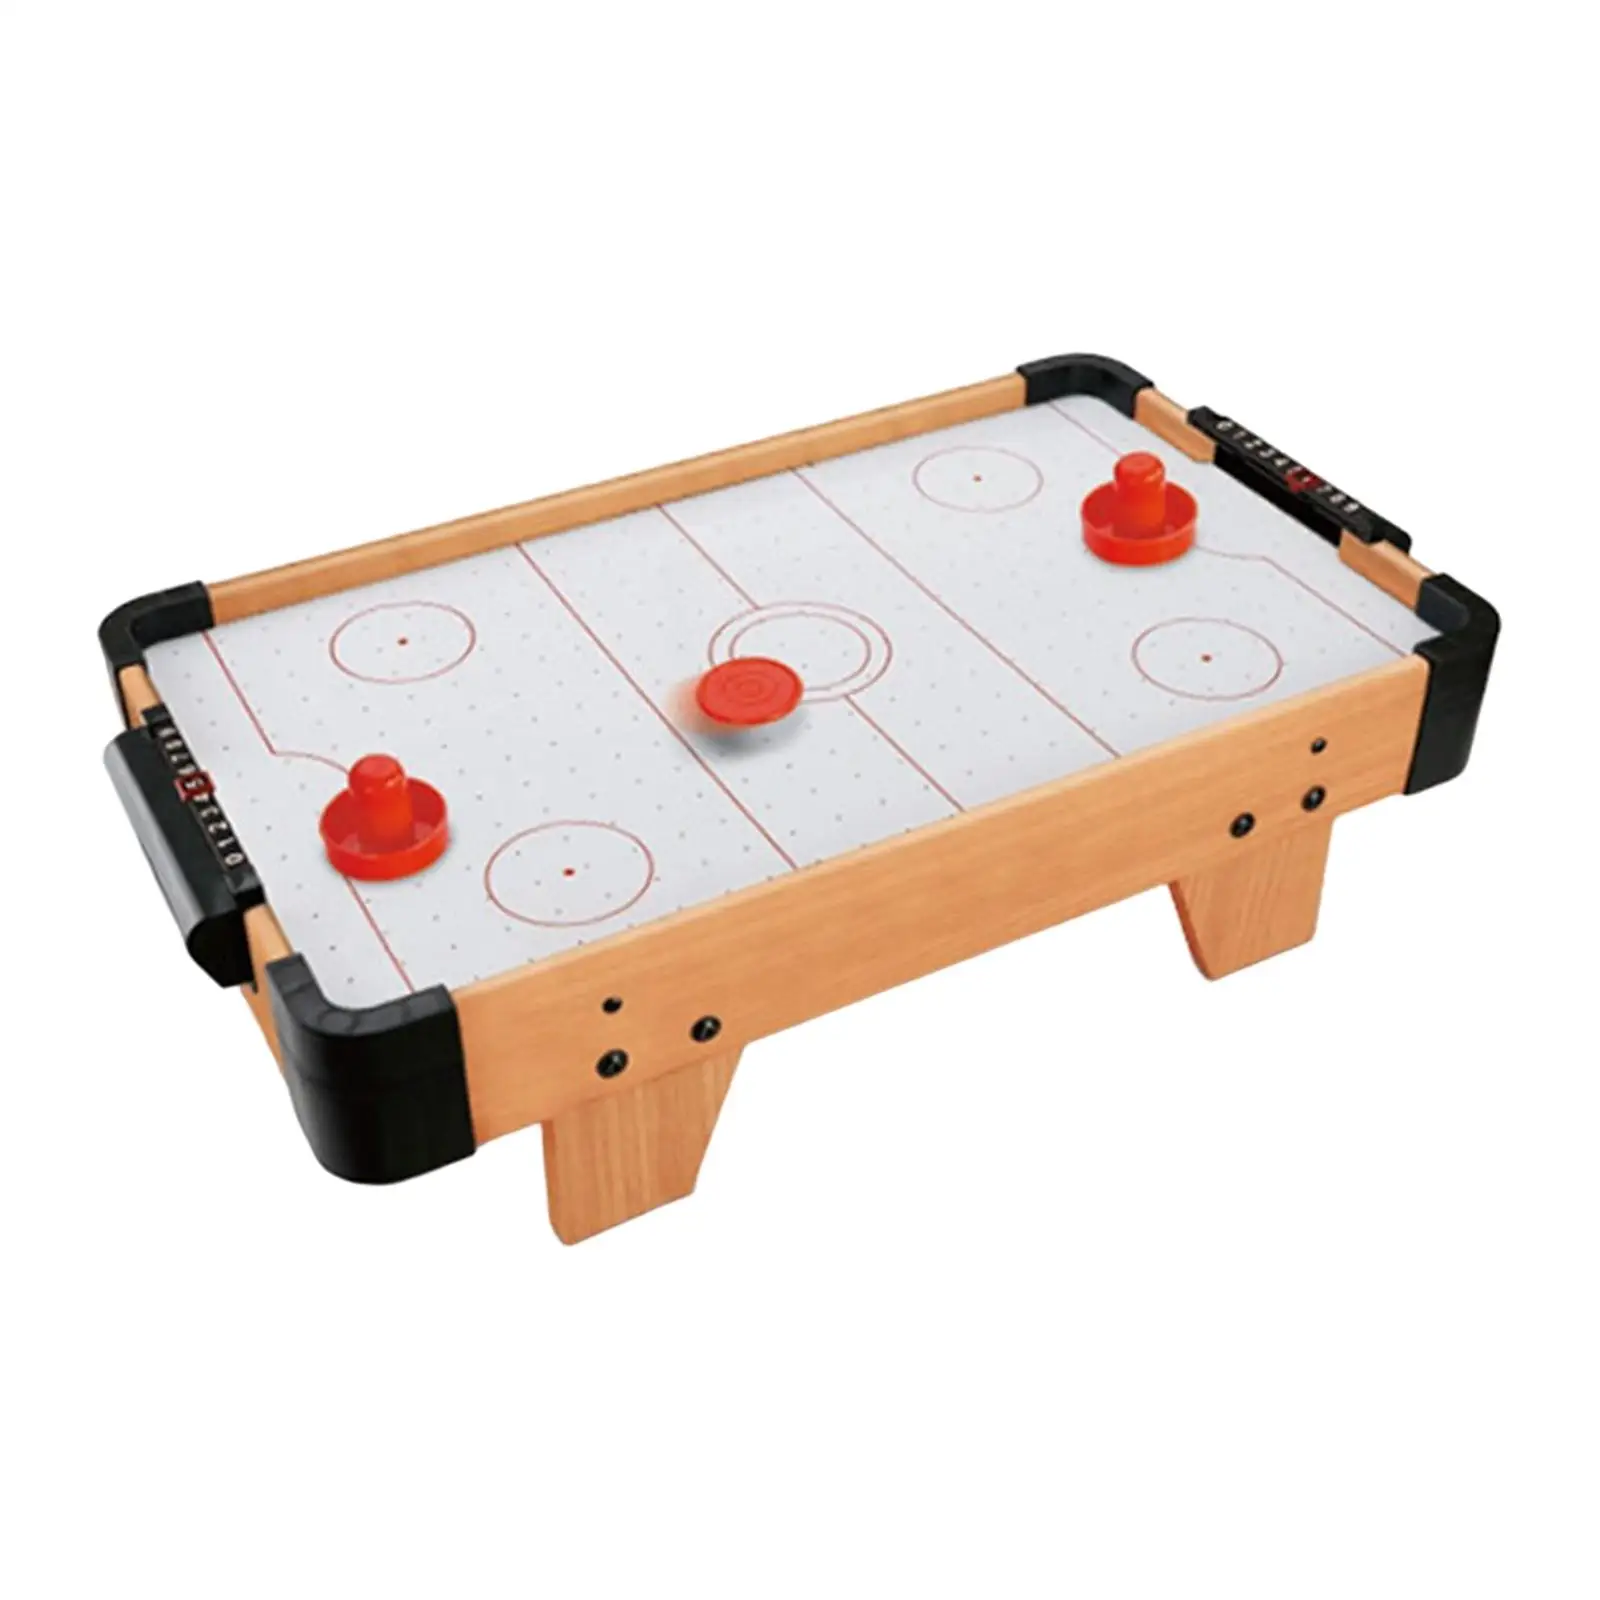 Air Hockey Table Paced Winner Board Game Desktop Playing Party with Sliders and Pucks Family Game for Children Girls Boys